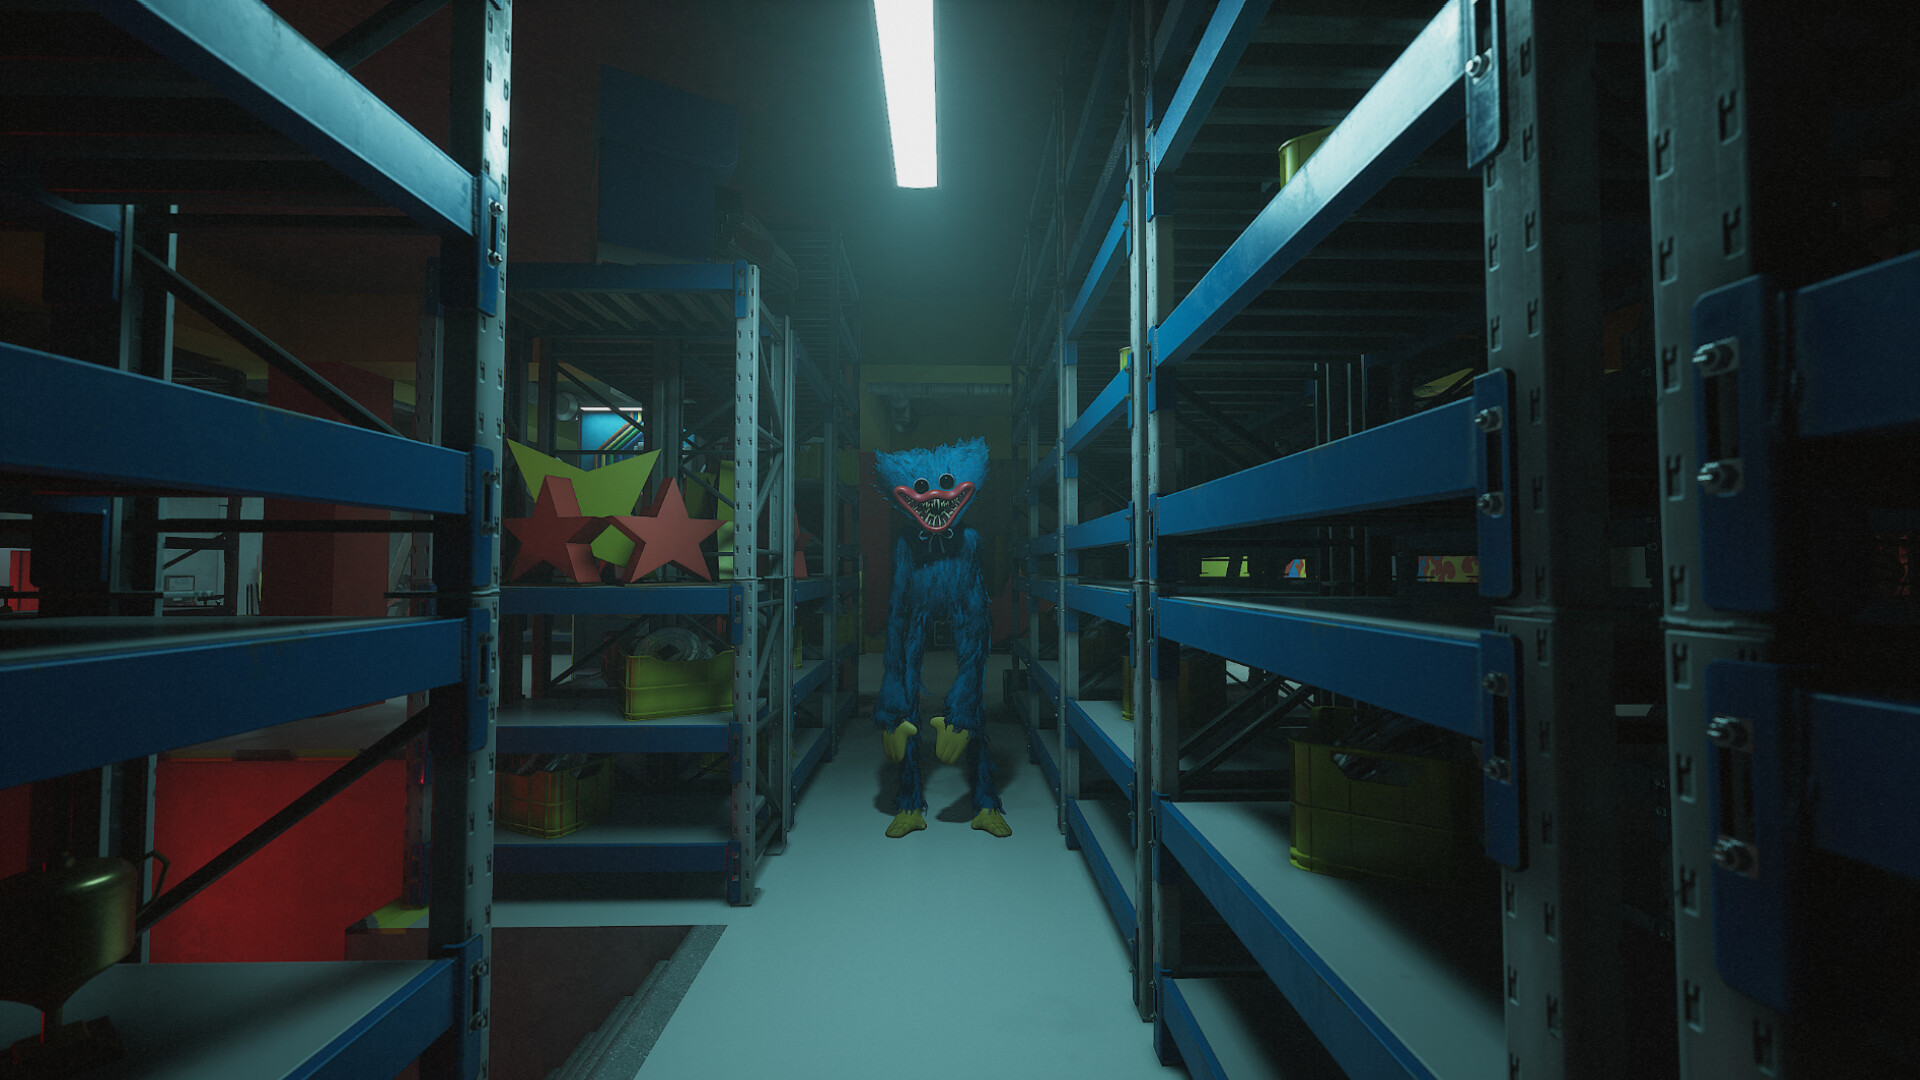 Let’s talk about Project Playtime: Secrets of the Toy Factory